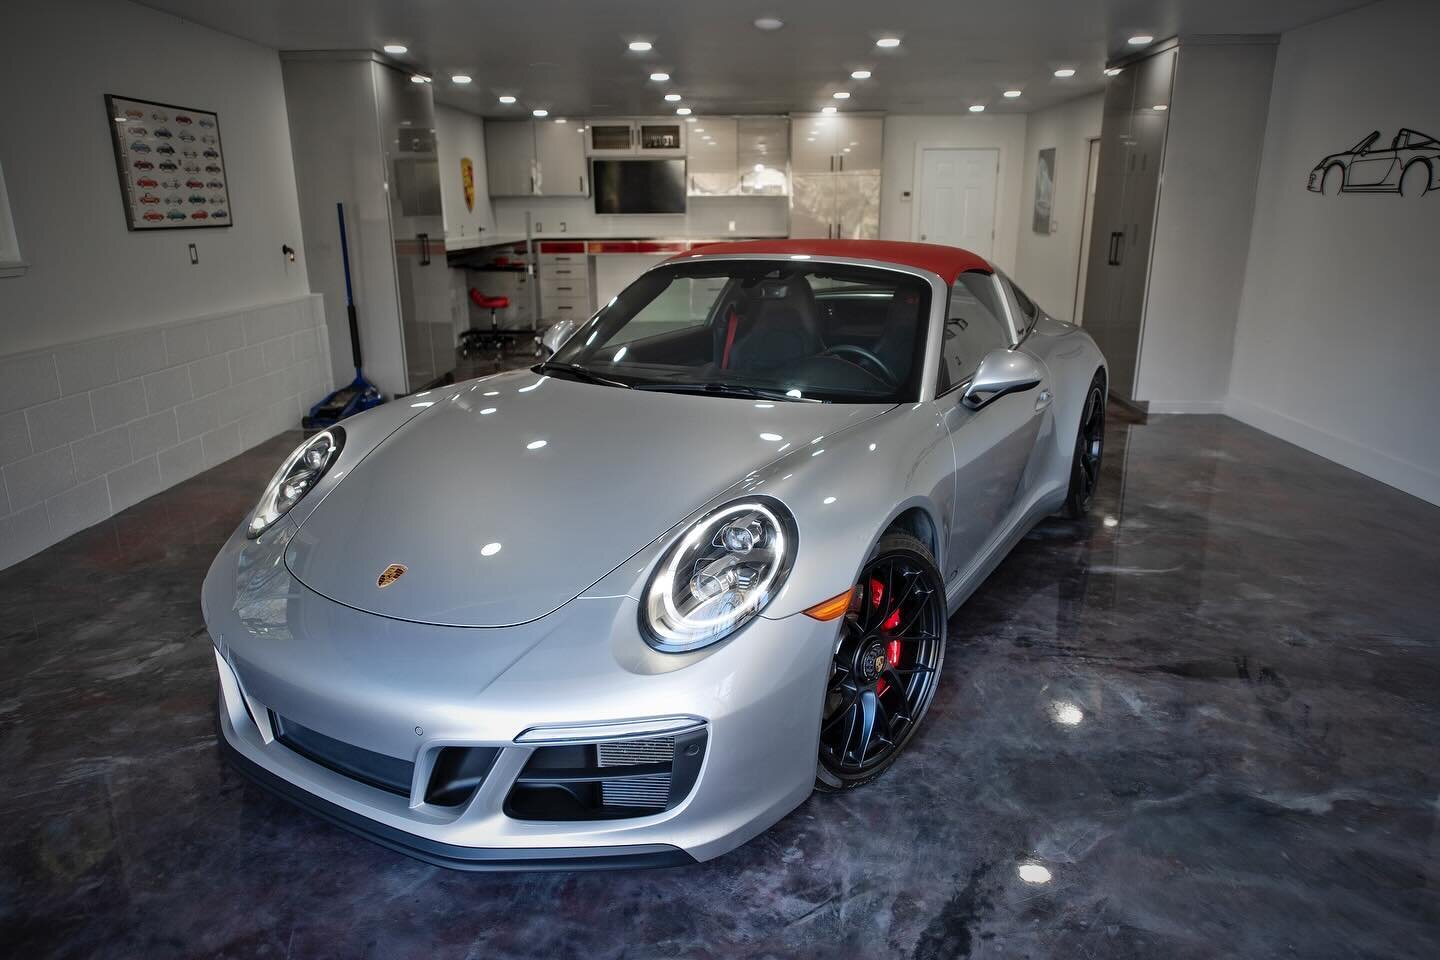 This 2019 Porsche 911 Targa 4 GTS is gorgeous. I could have spent a whole day just photographing this one car by itself. And that garage? Flawless. 
.
#porsche #porsche911 #911 #targa #gts #cars #cargram #carsofinstagram #carphotography #carporn #spo